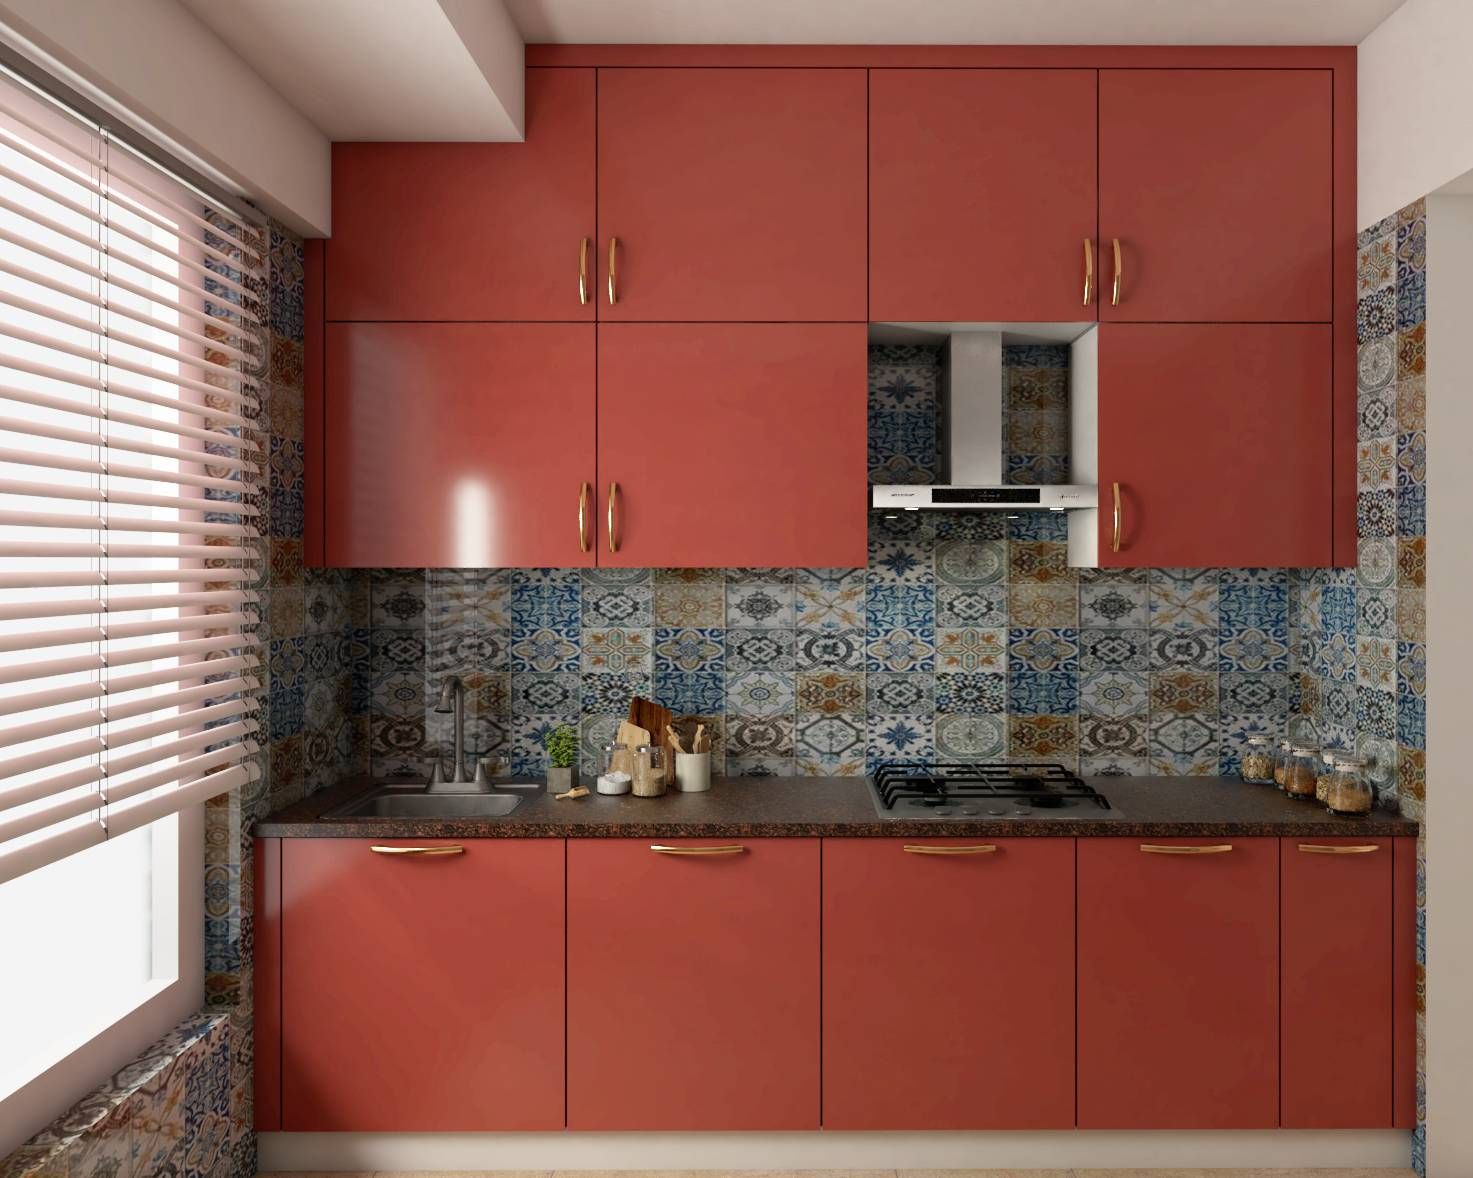 Modern Parallel Red Kitchen Design With Patterned Dado Tiles